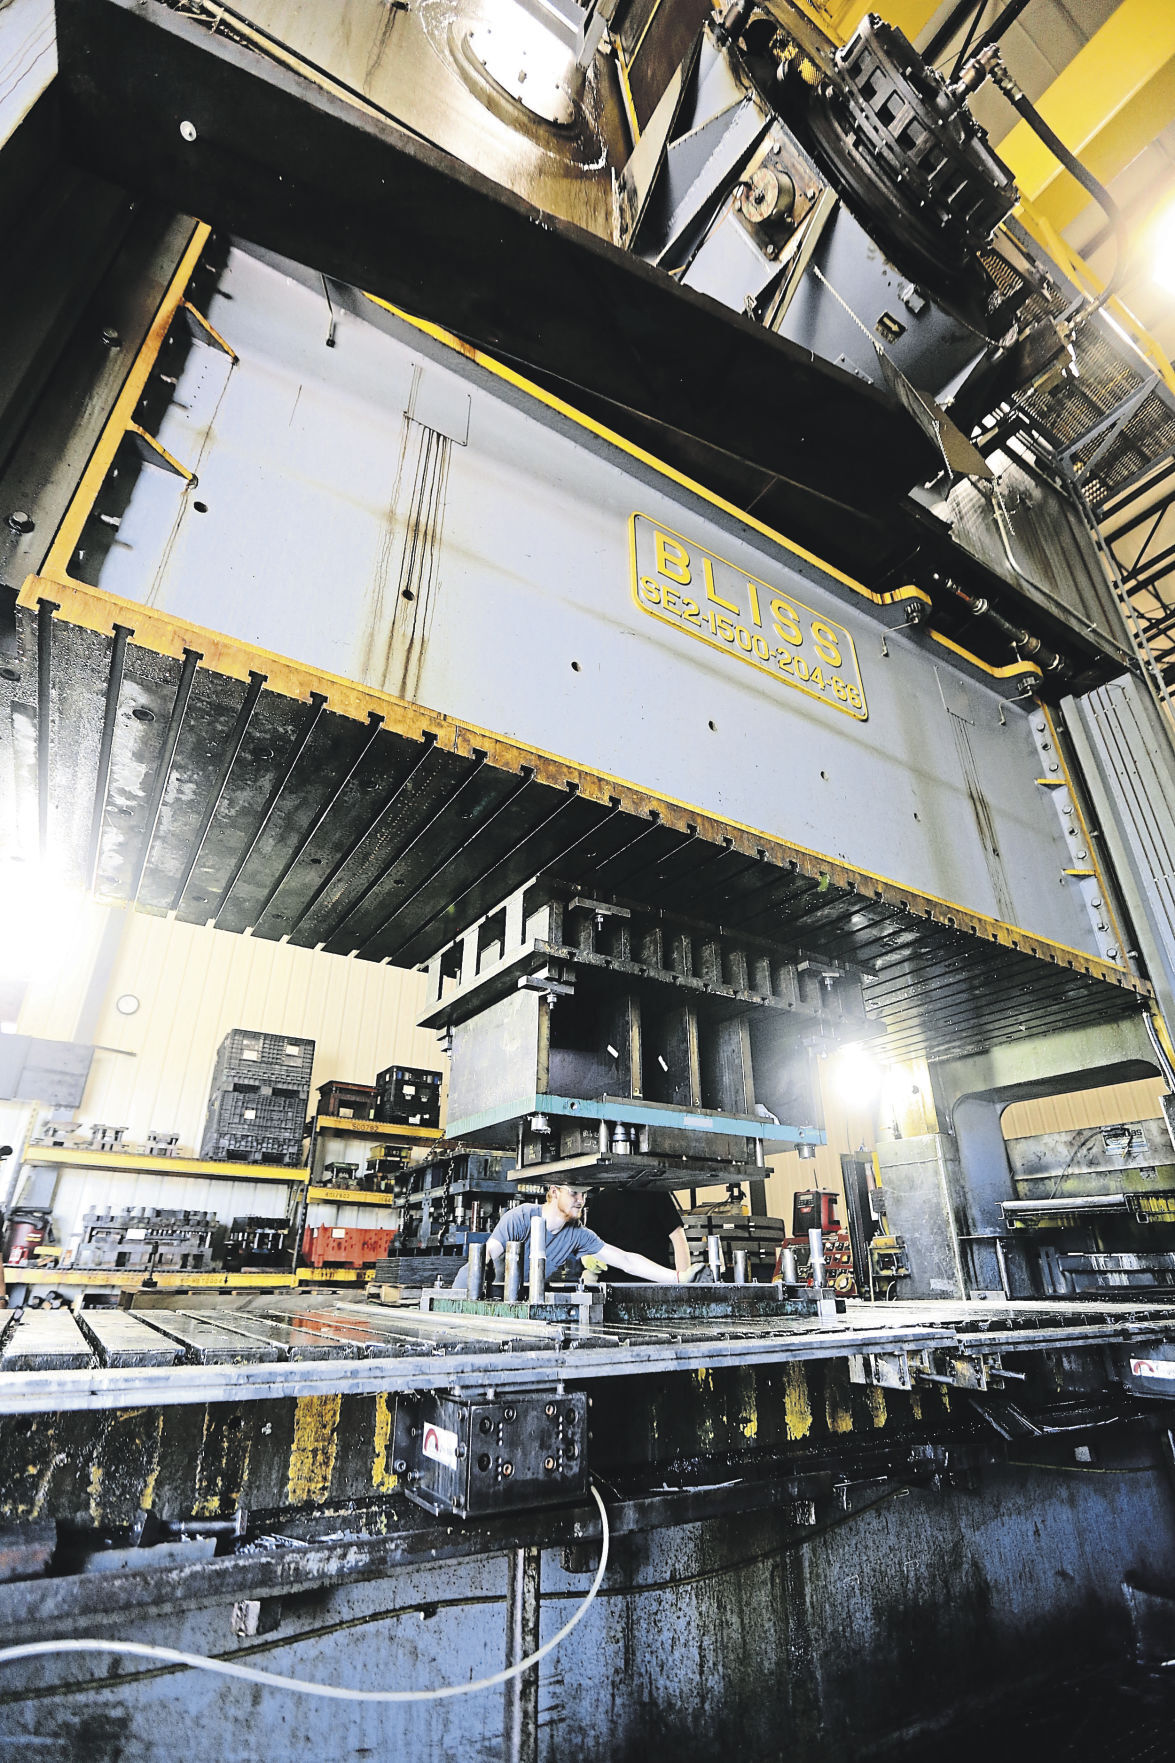 Employees of Uelner Precision Tools & Dies operate the largest press on-site, a 1,500-ton press. The Dubuque business, which creates parts components for numerous manufacturers, will celebrate 75 years in 2021.    PHOTO CREDIT: Dave Kettering